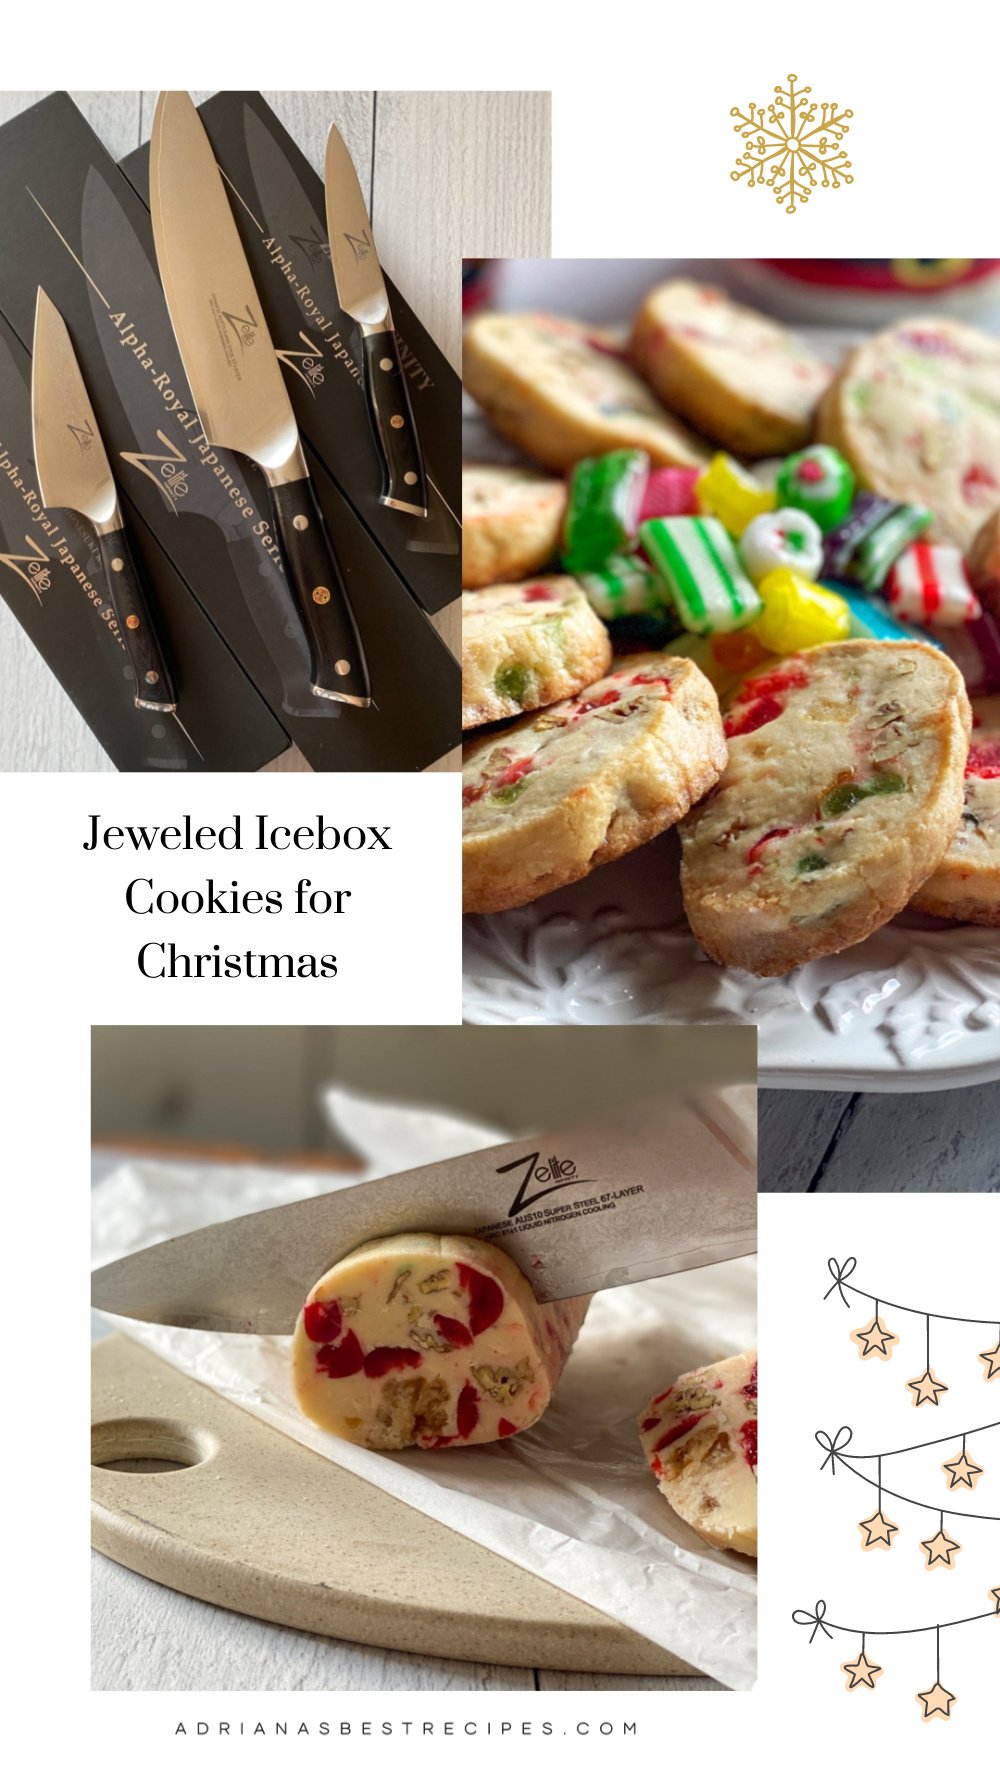 Jeweled Icebox Cookies for Christmas with candied fruit and dry cherries